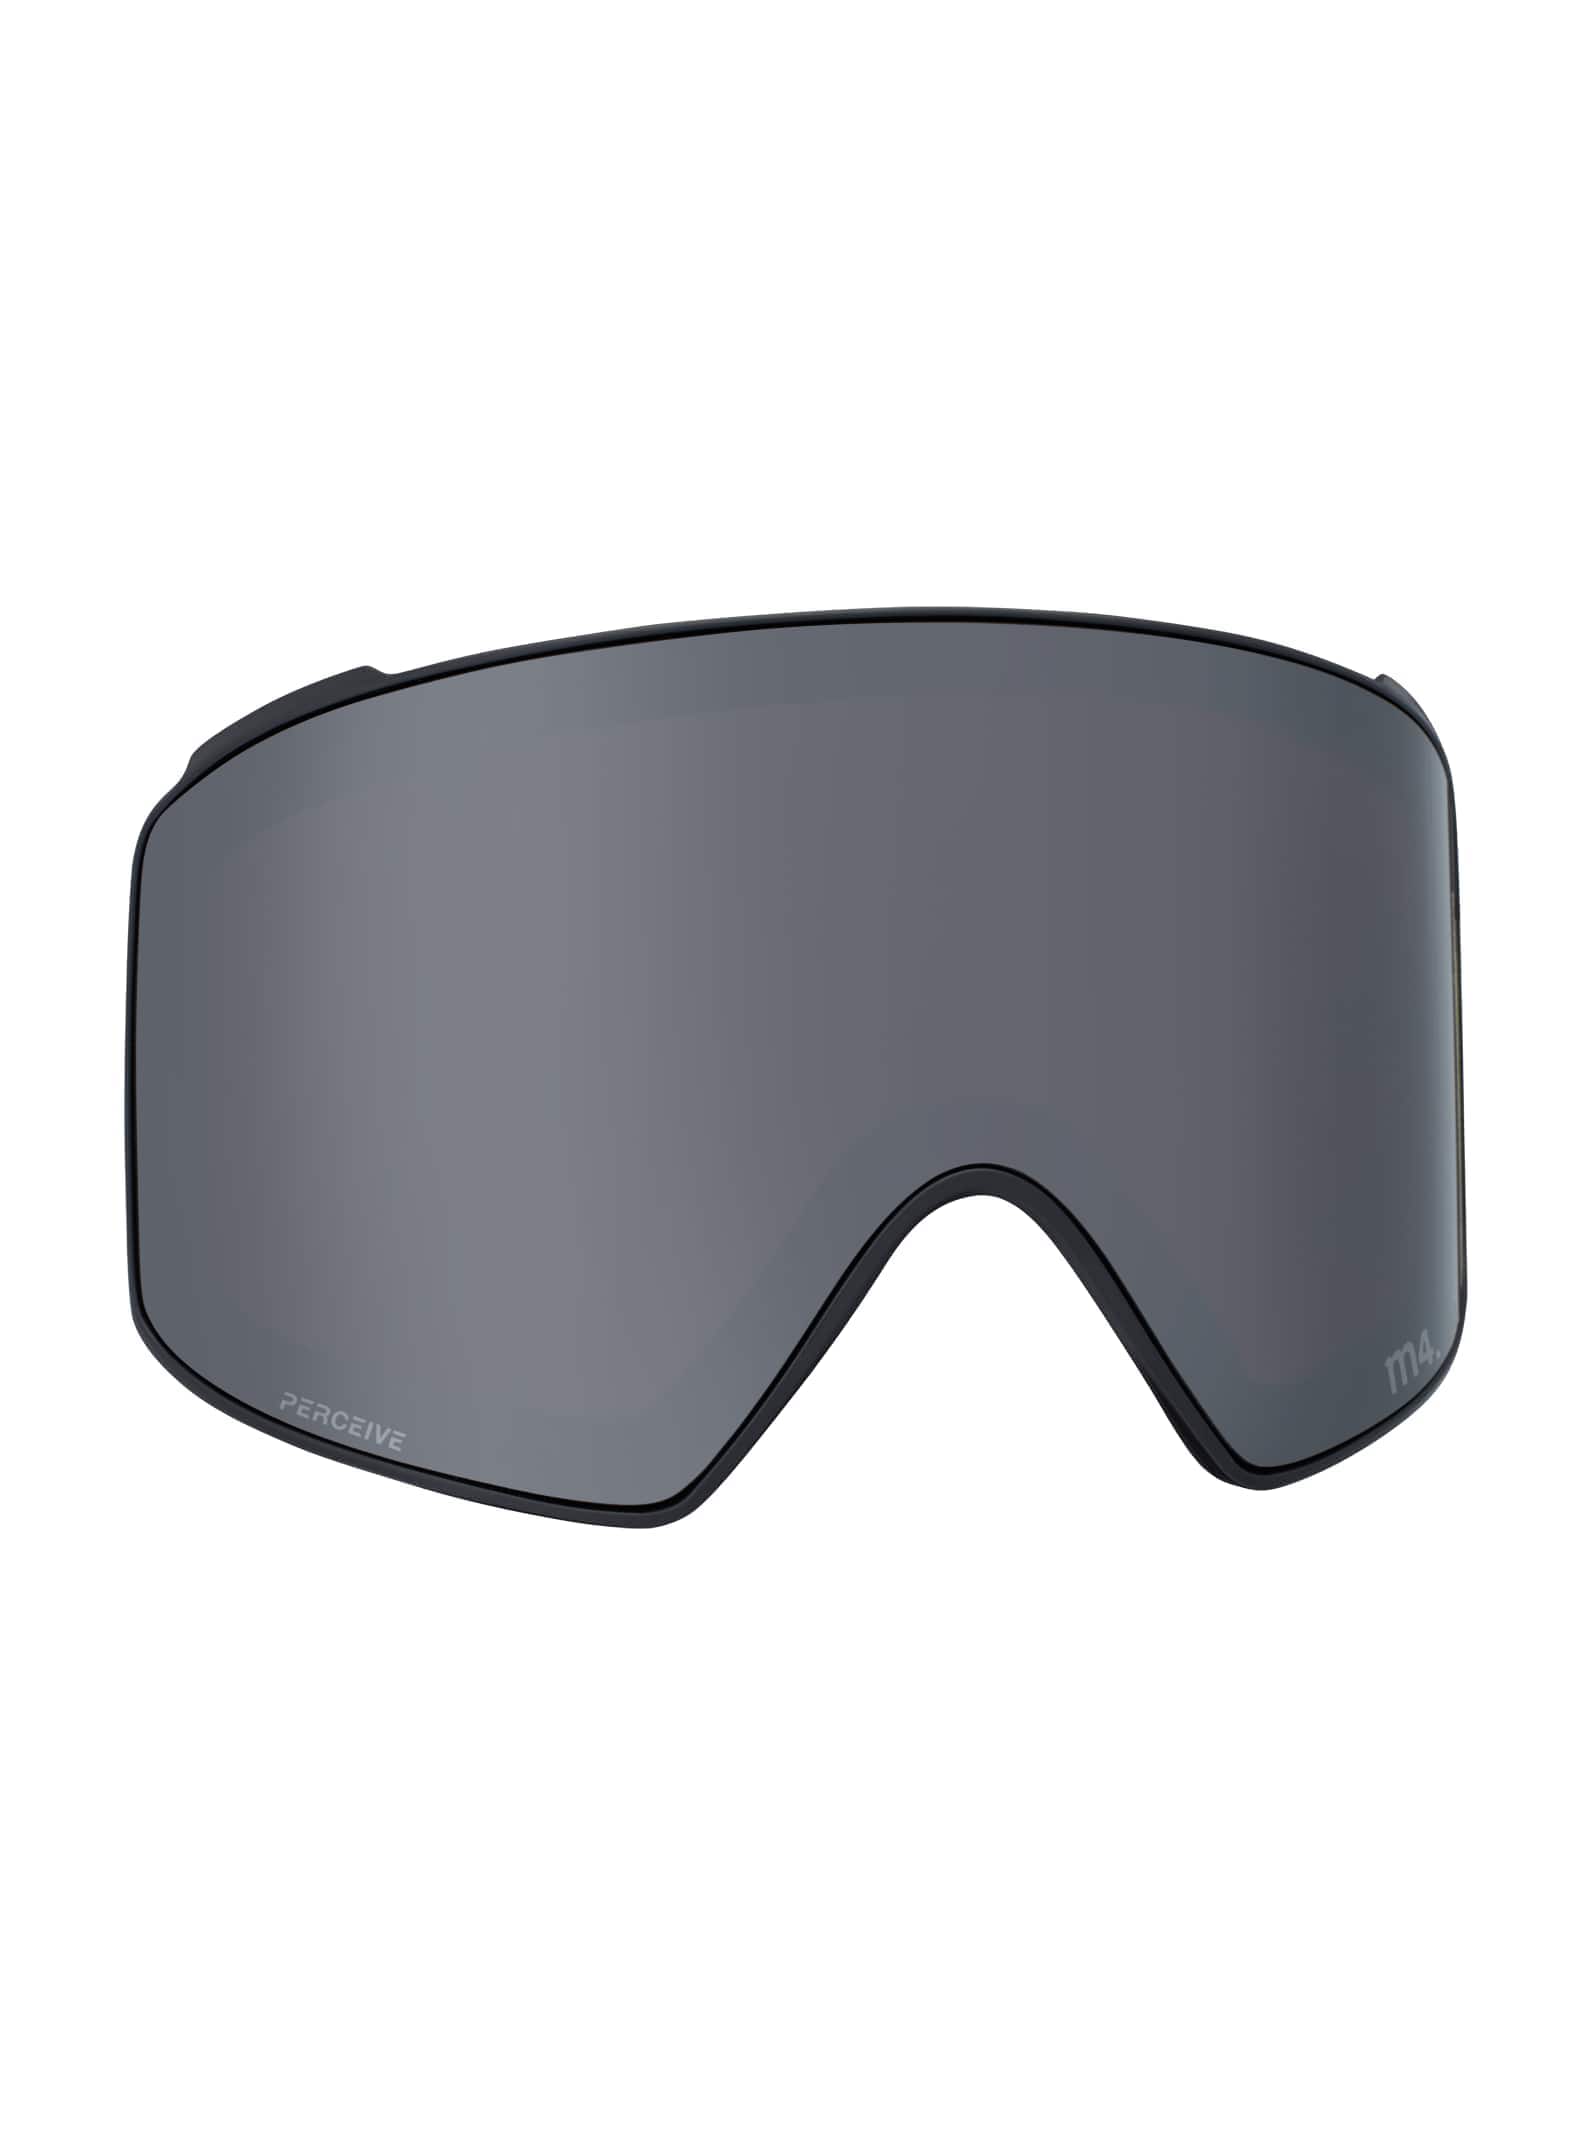 M4S PERCEIVE Goggle Lens (Cylindrical)